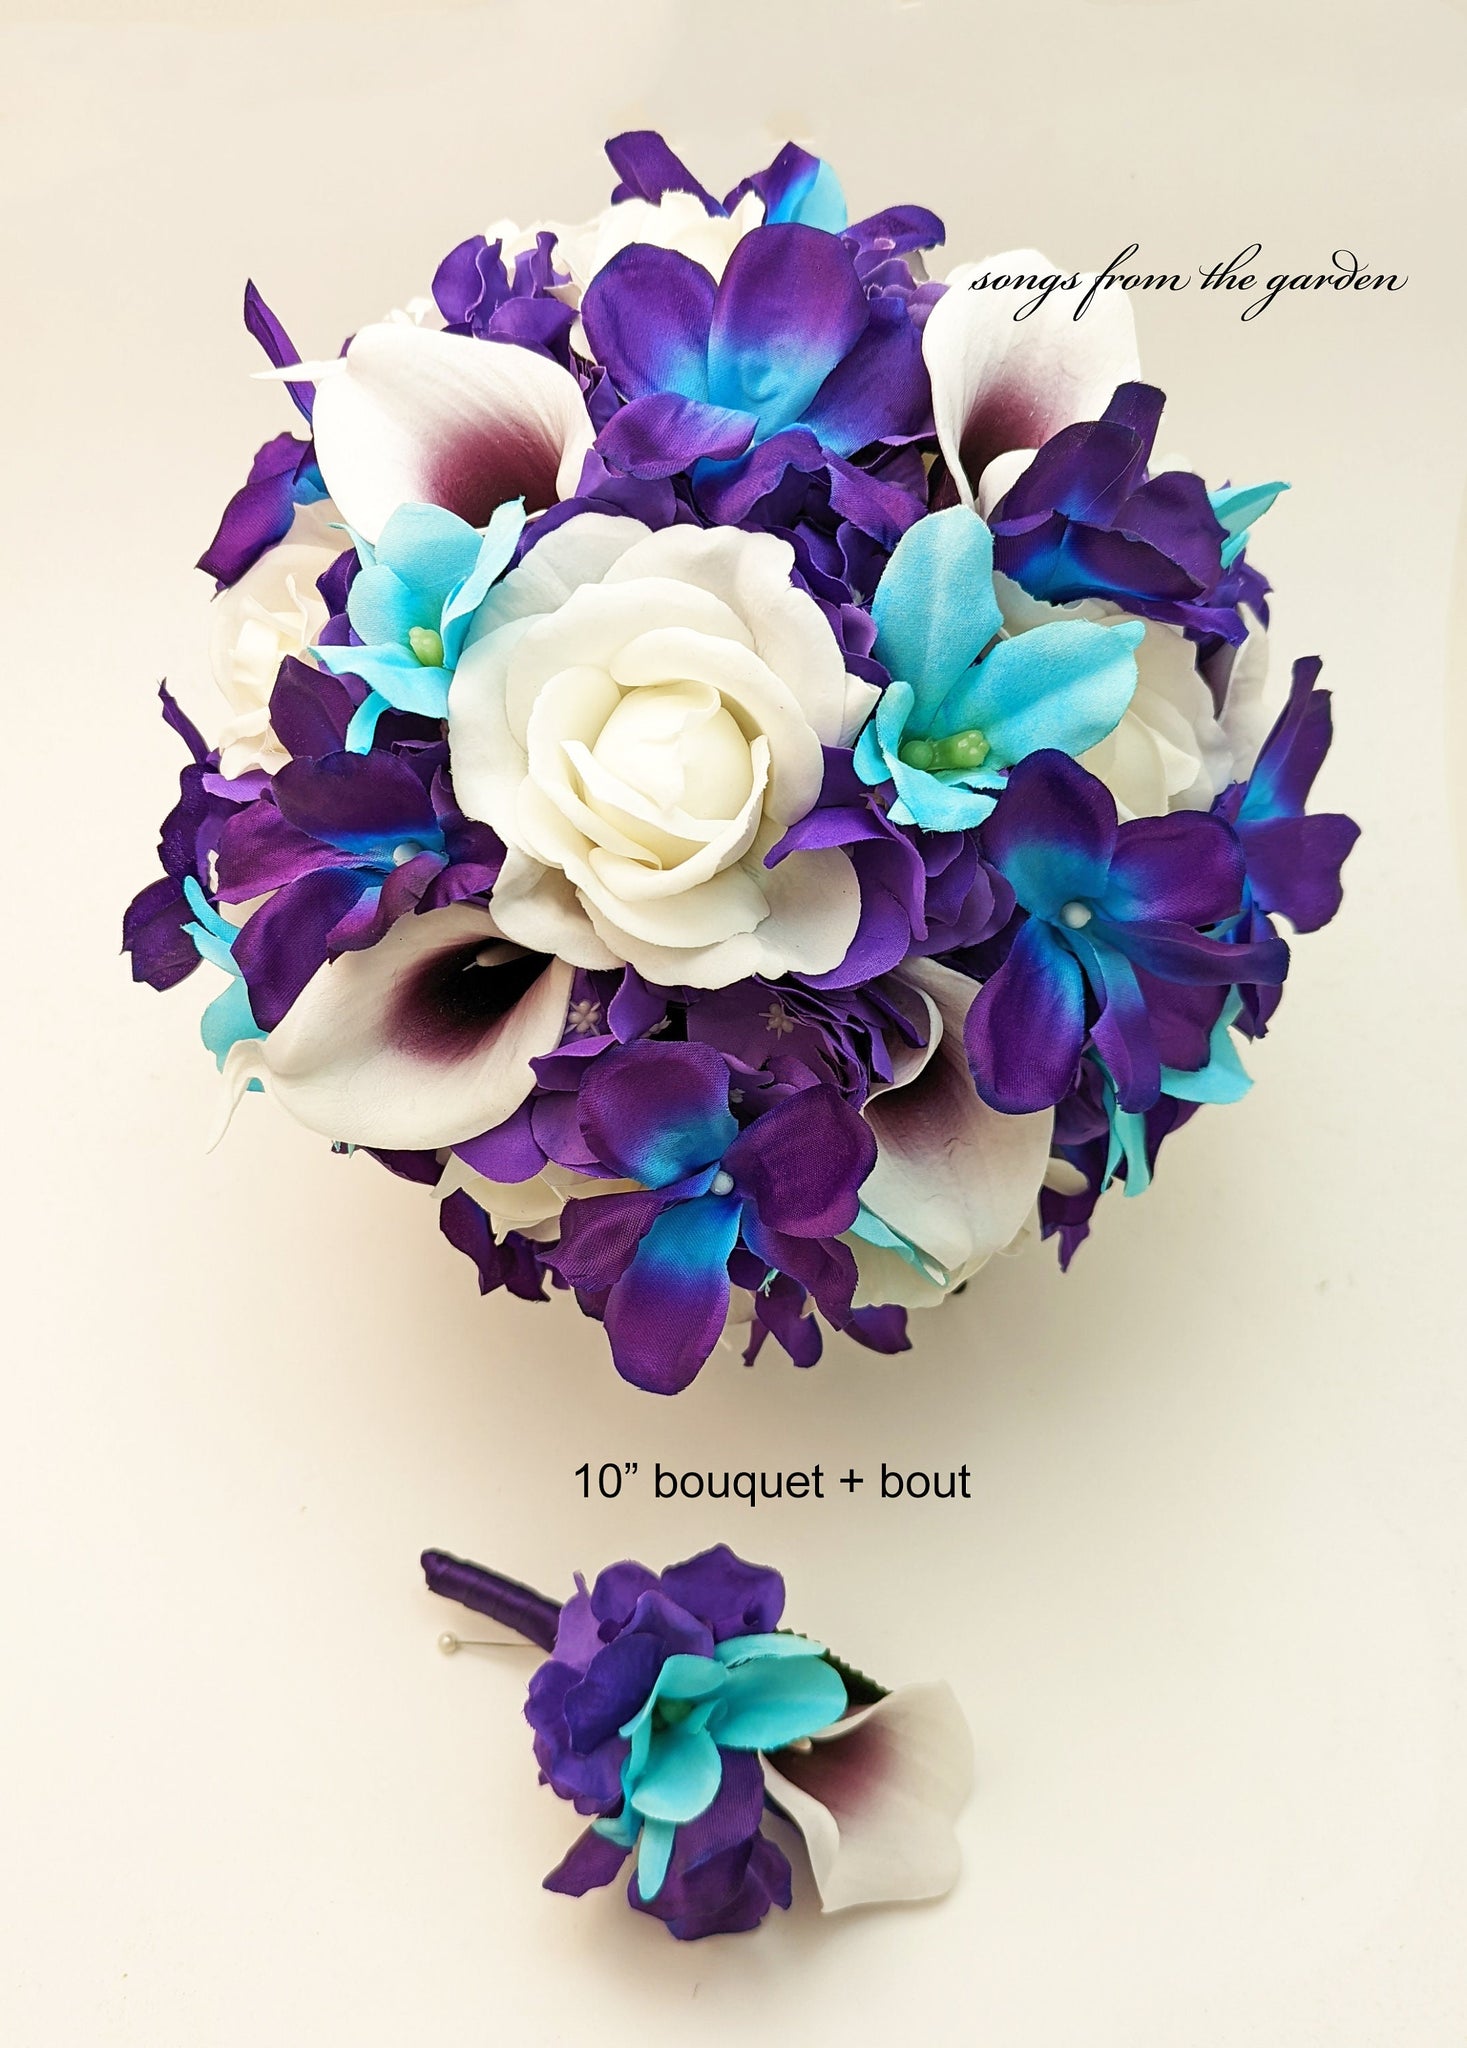 Blue Galaxy & Aqua Orchid Bridal or Bridesmaid Bouquet - add a Groom's or Groomsmen Boutonniere Arch Flowers Centerpieces Corsages and More!